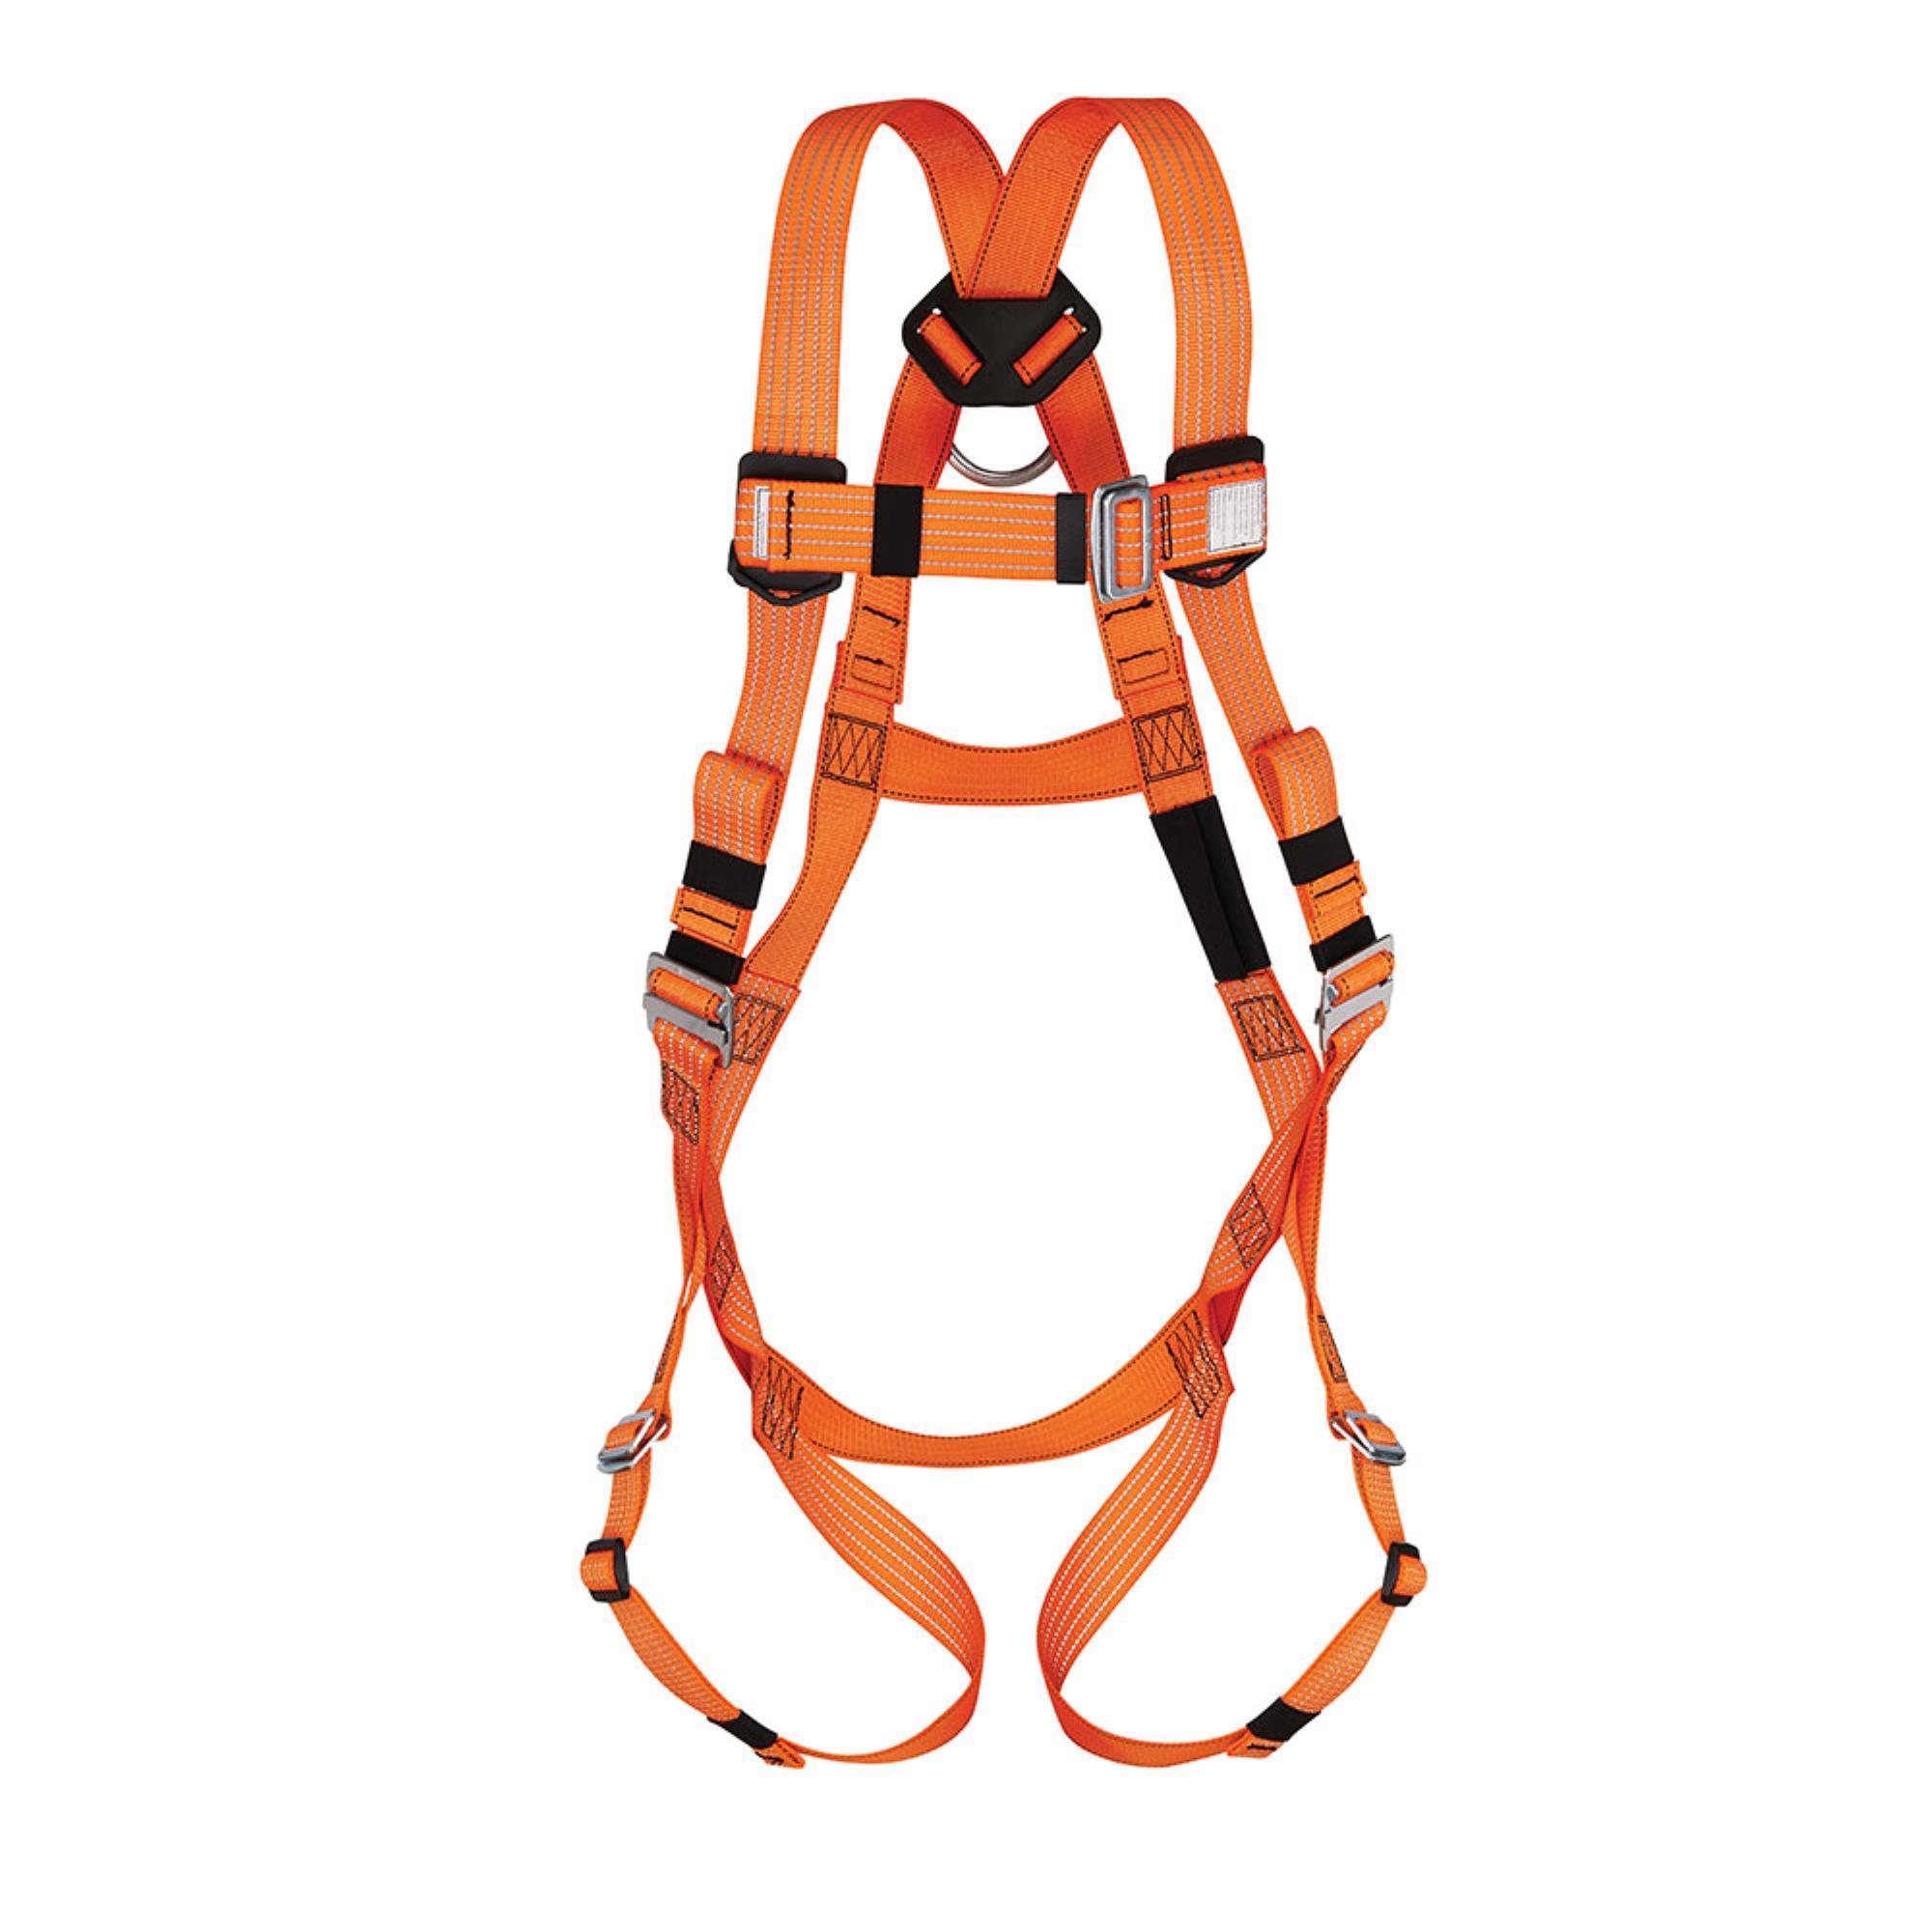 Peak Works, Contractor Harness 400 Lbs Class A, Weight Capacity 400 lb, Harness Size One Size, Model V8008000